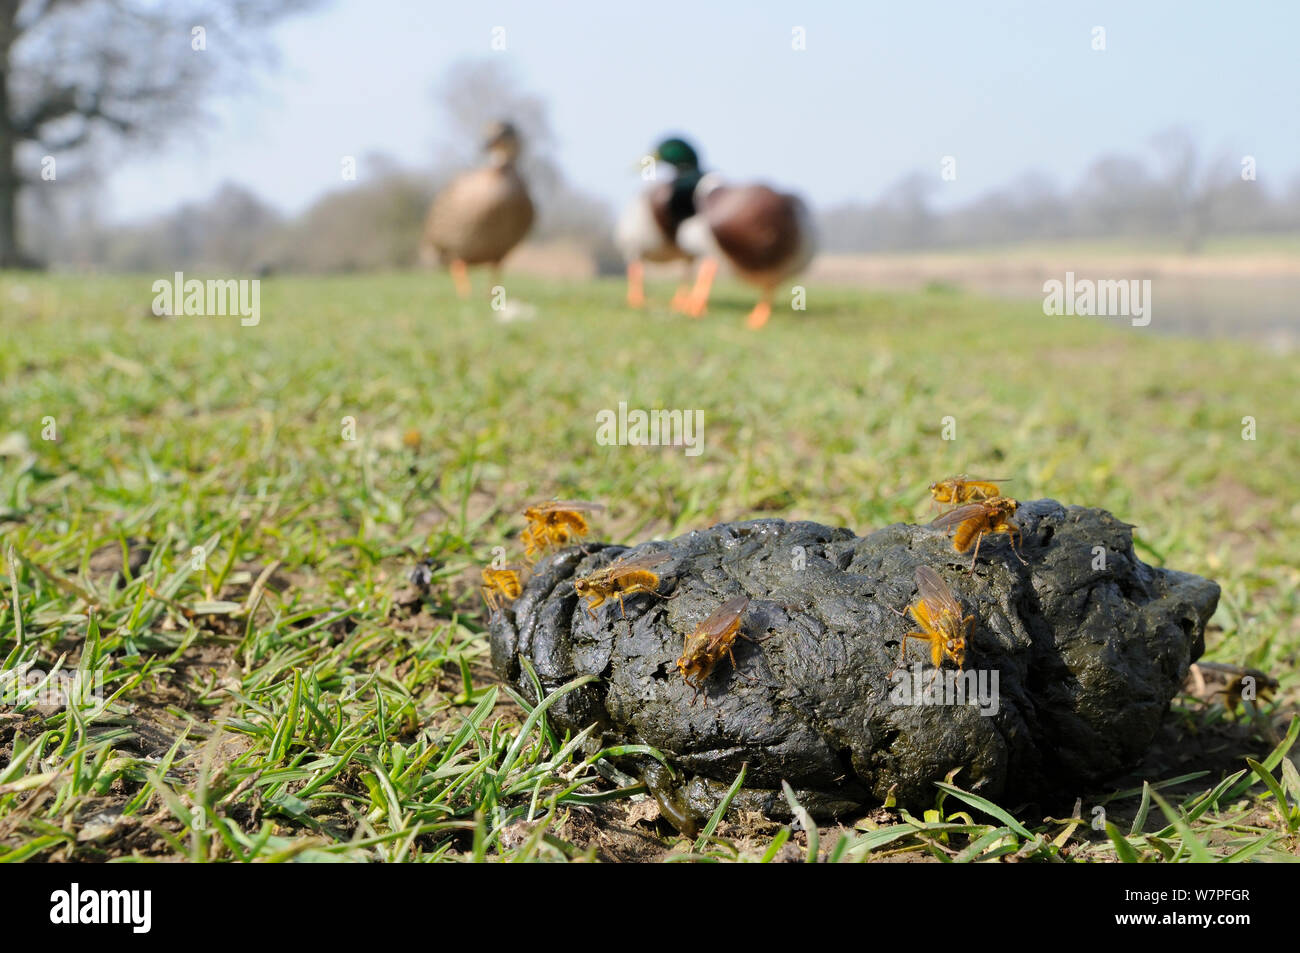 Male Yellow dung flies (Scathophaga stercoraria) waiting on sheep dung for females to arrive, with Mallards (Anas platyrhynchos) and a lake in the background, Wiltshire, UK, March. Stock Photo